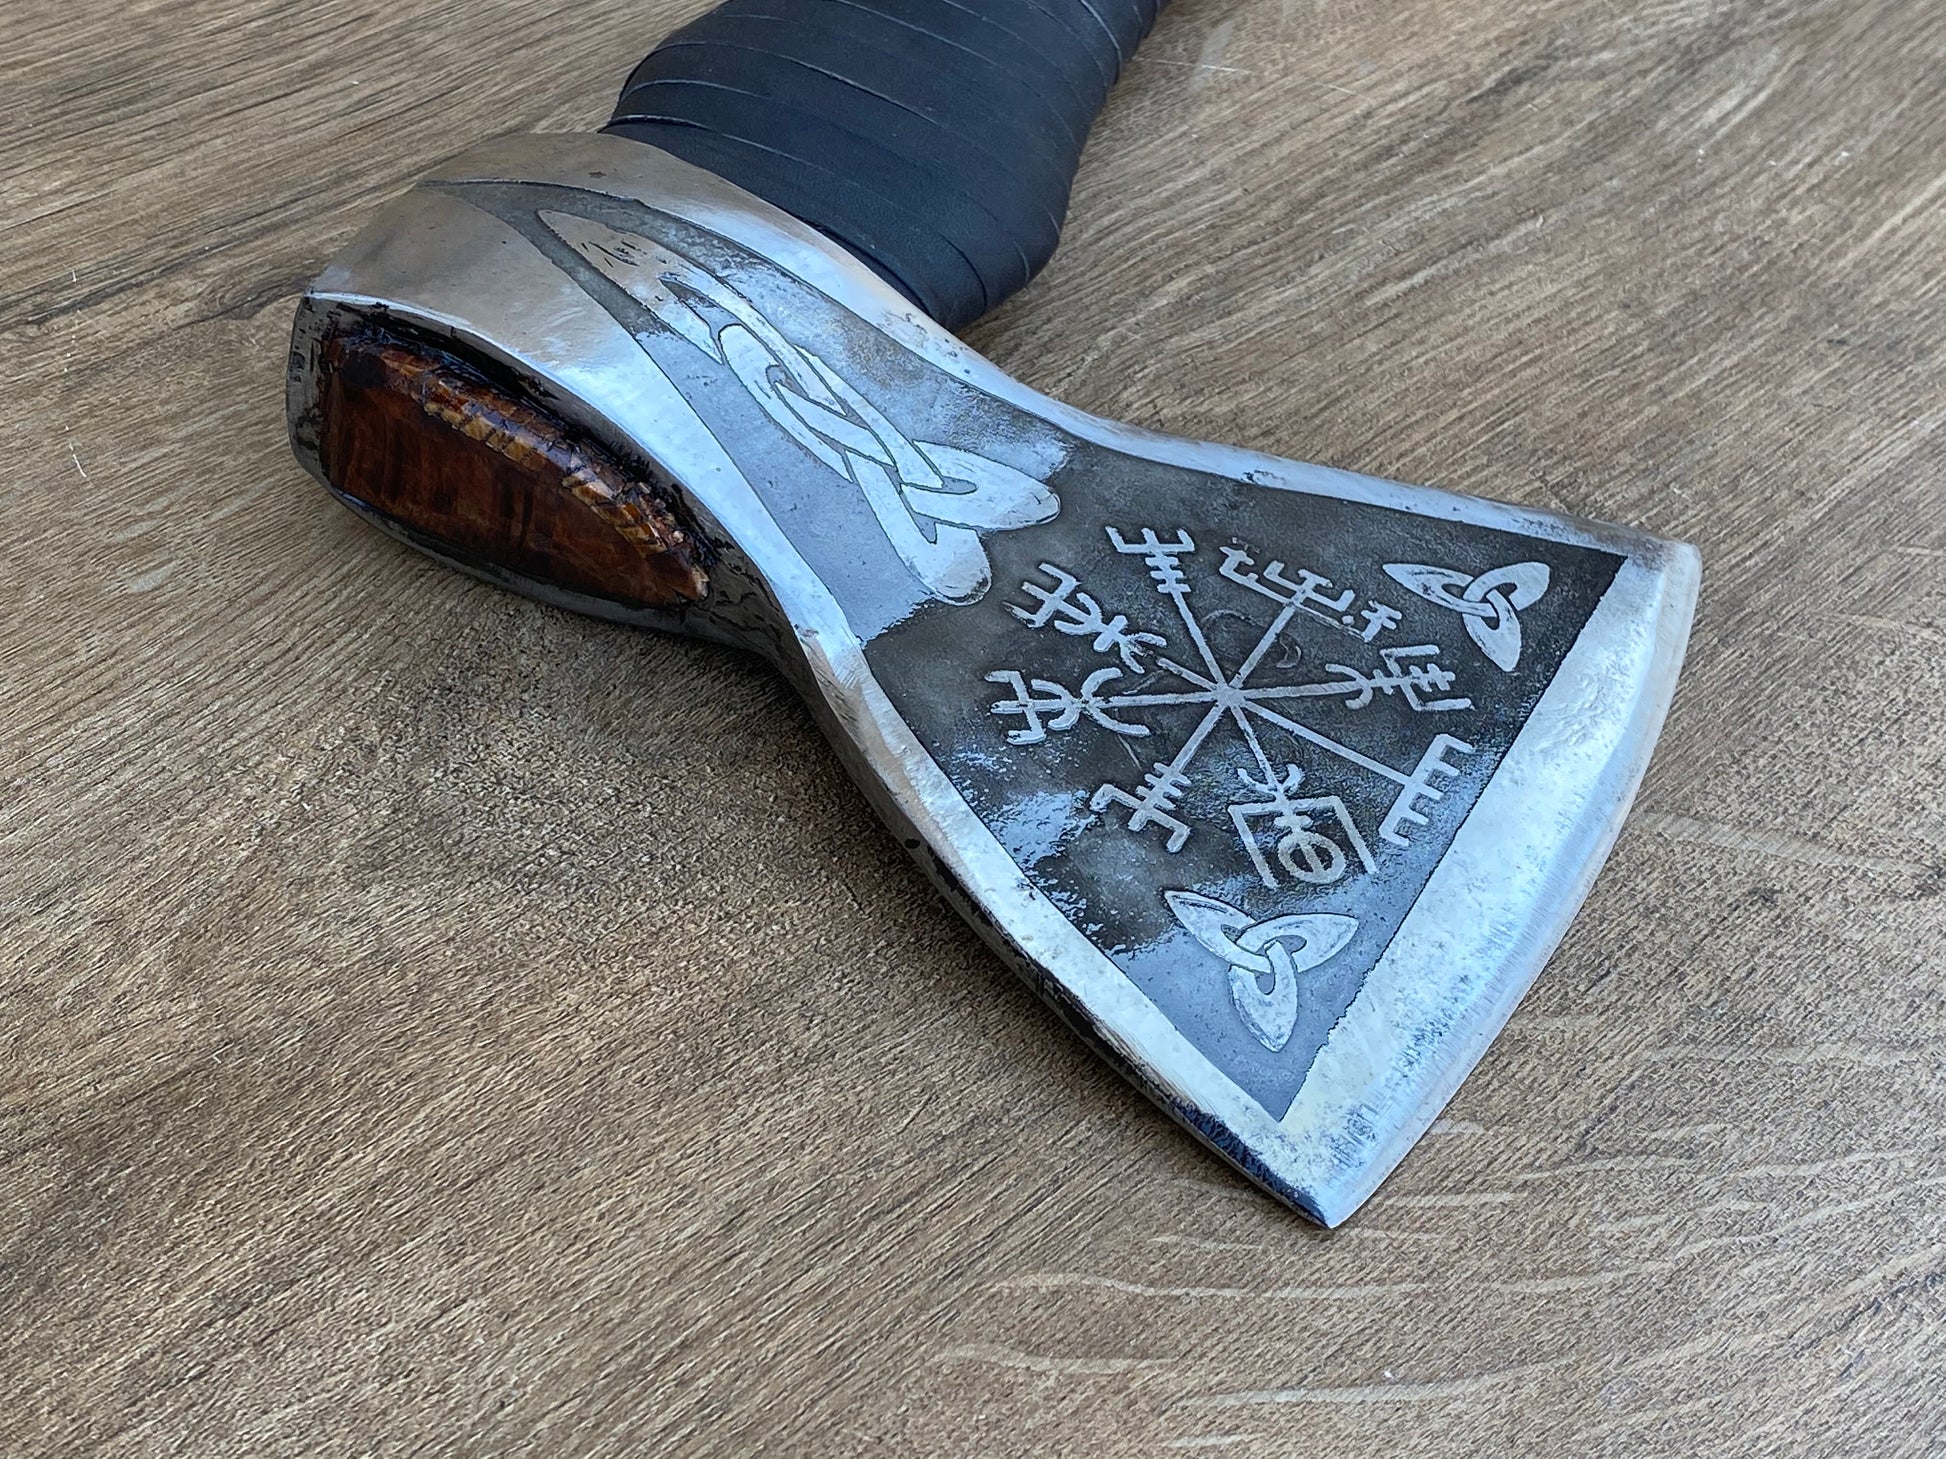 Viking axe, mens gifts, vegvisir, birthday, gift for dad, gift for boyfriend, Christmas, runes, runic words, etched runes, runic gift, axe